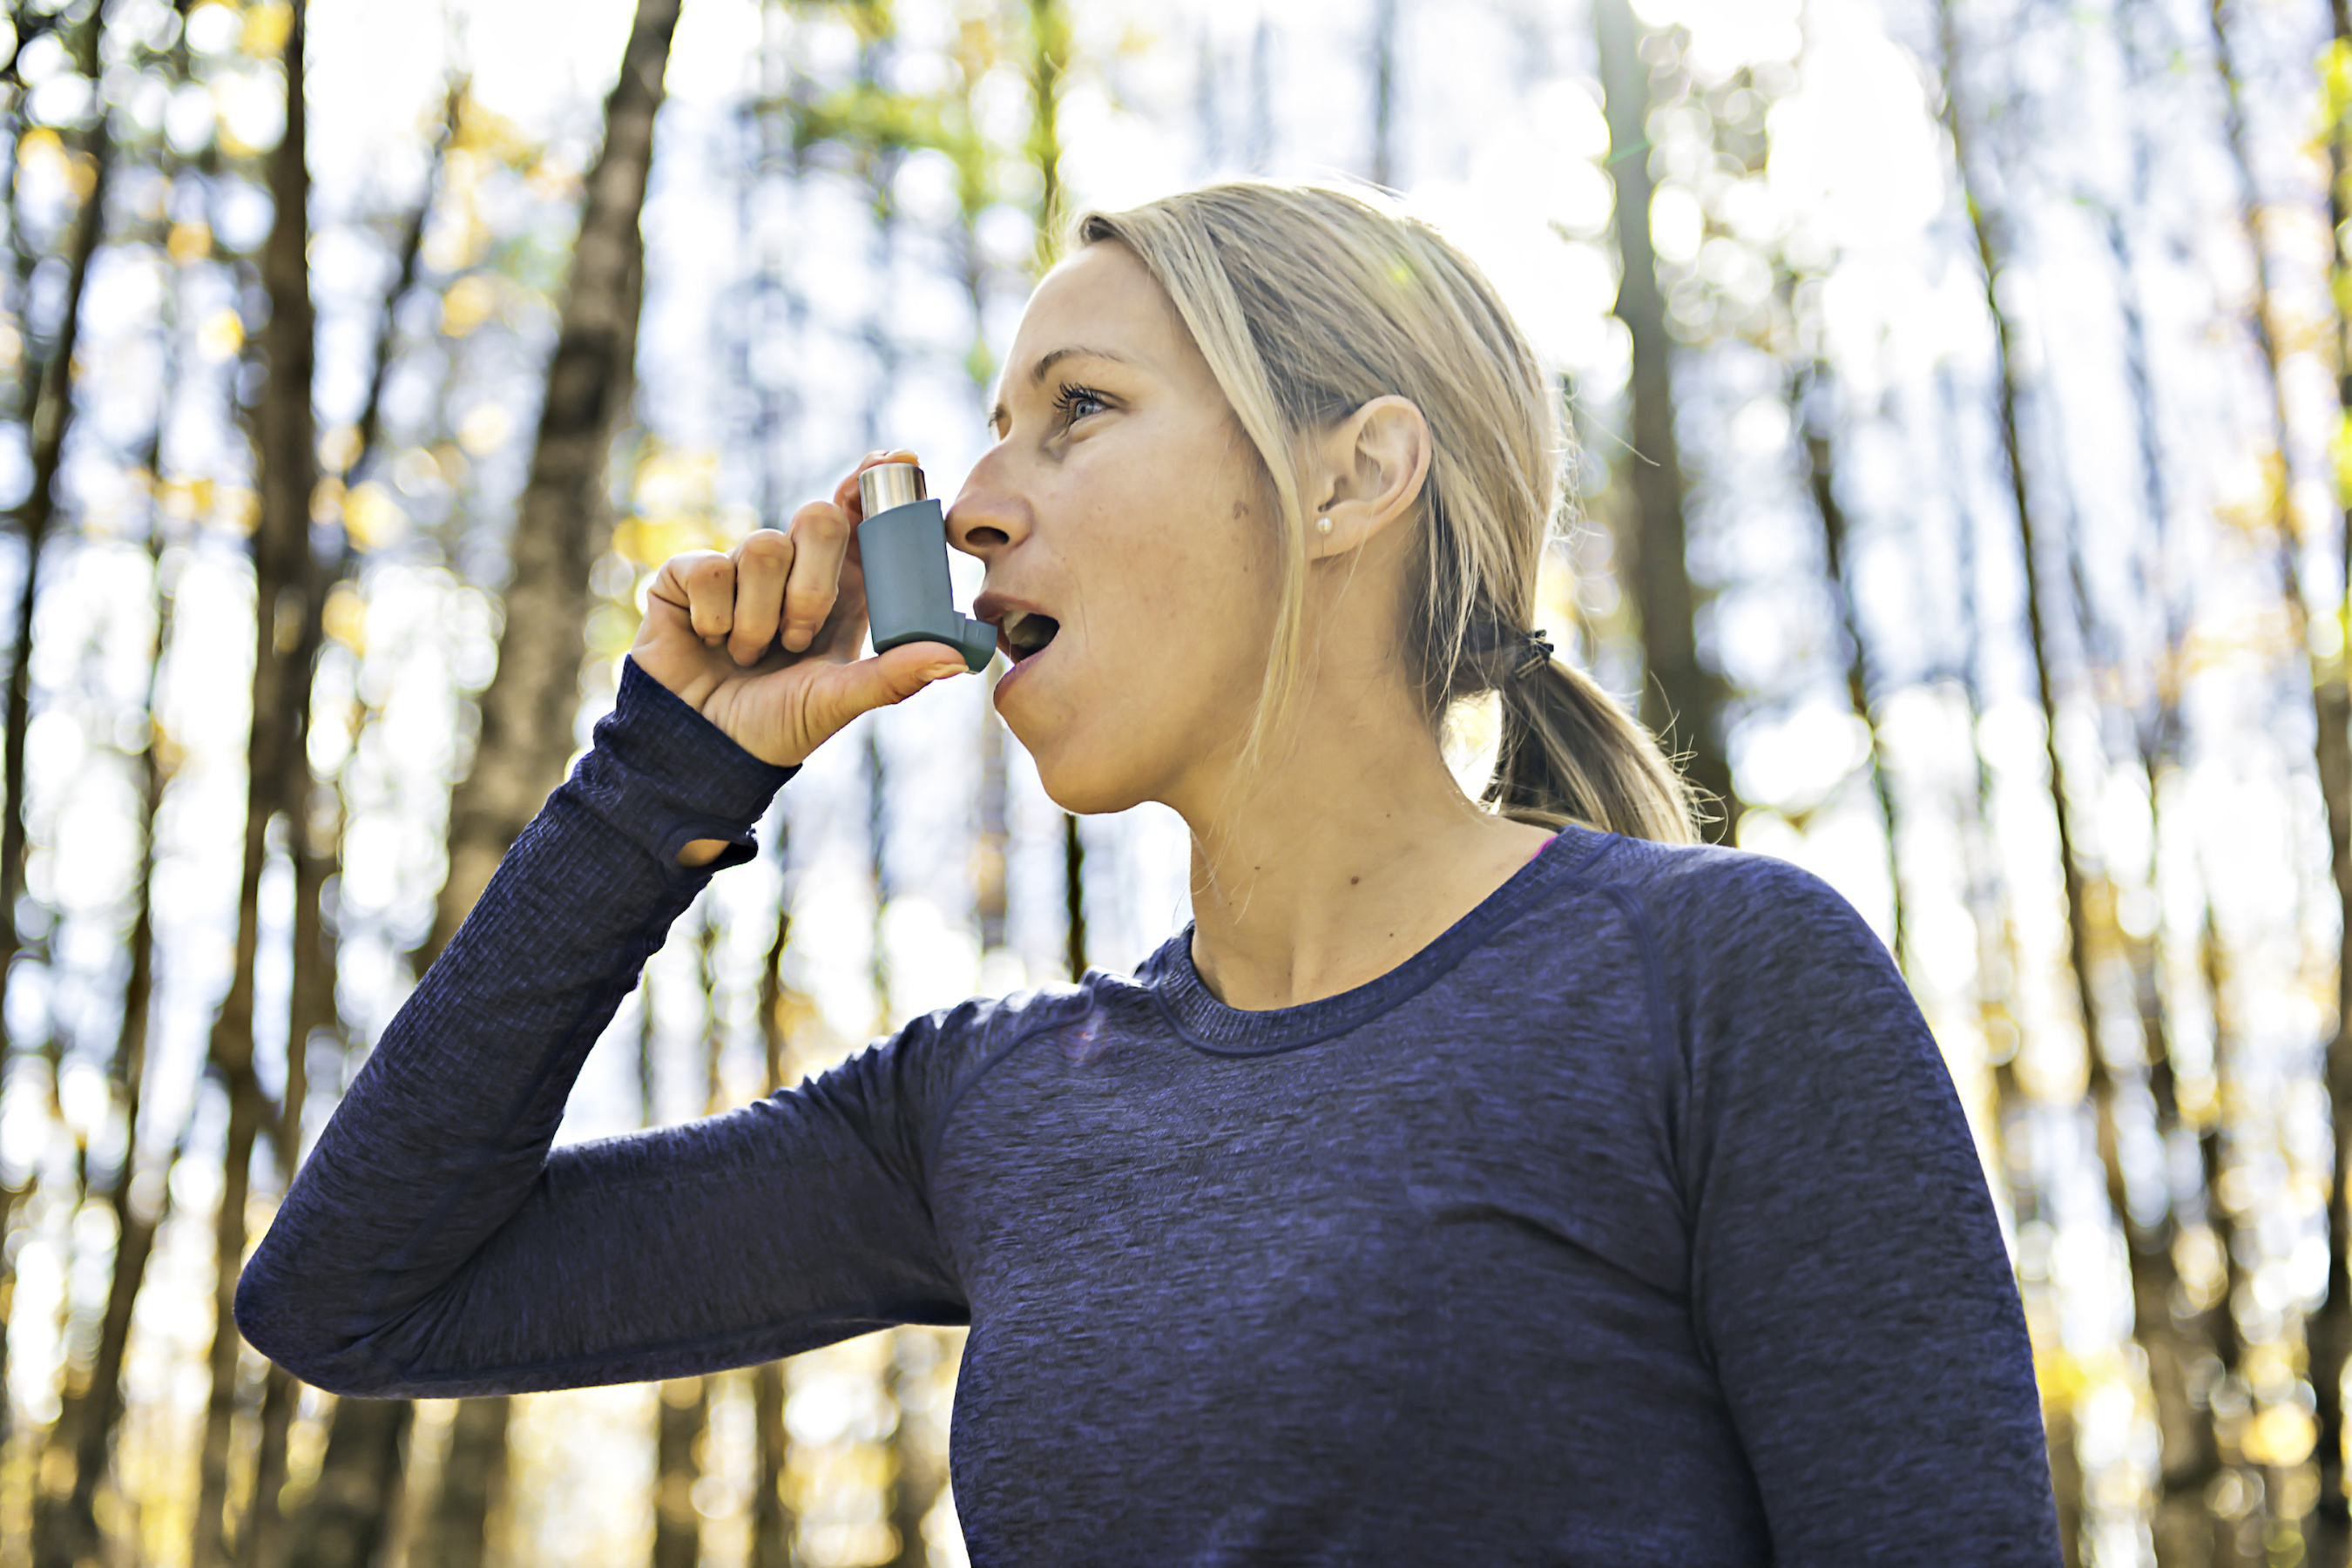 Exercise and Asthma